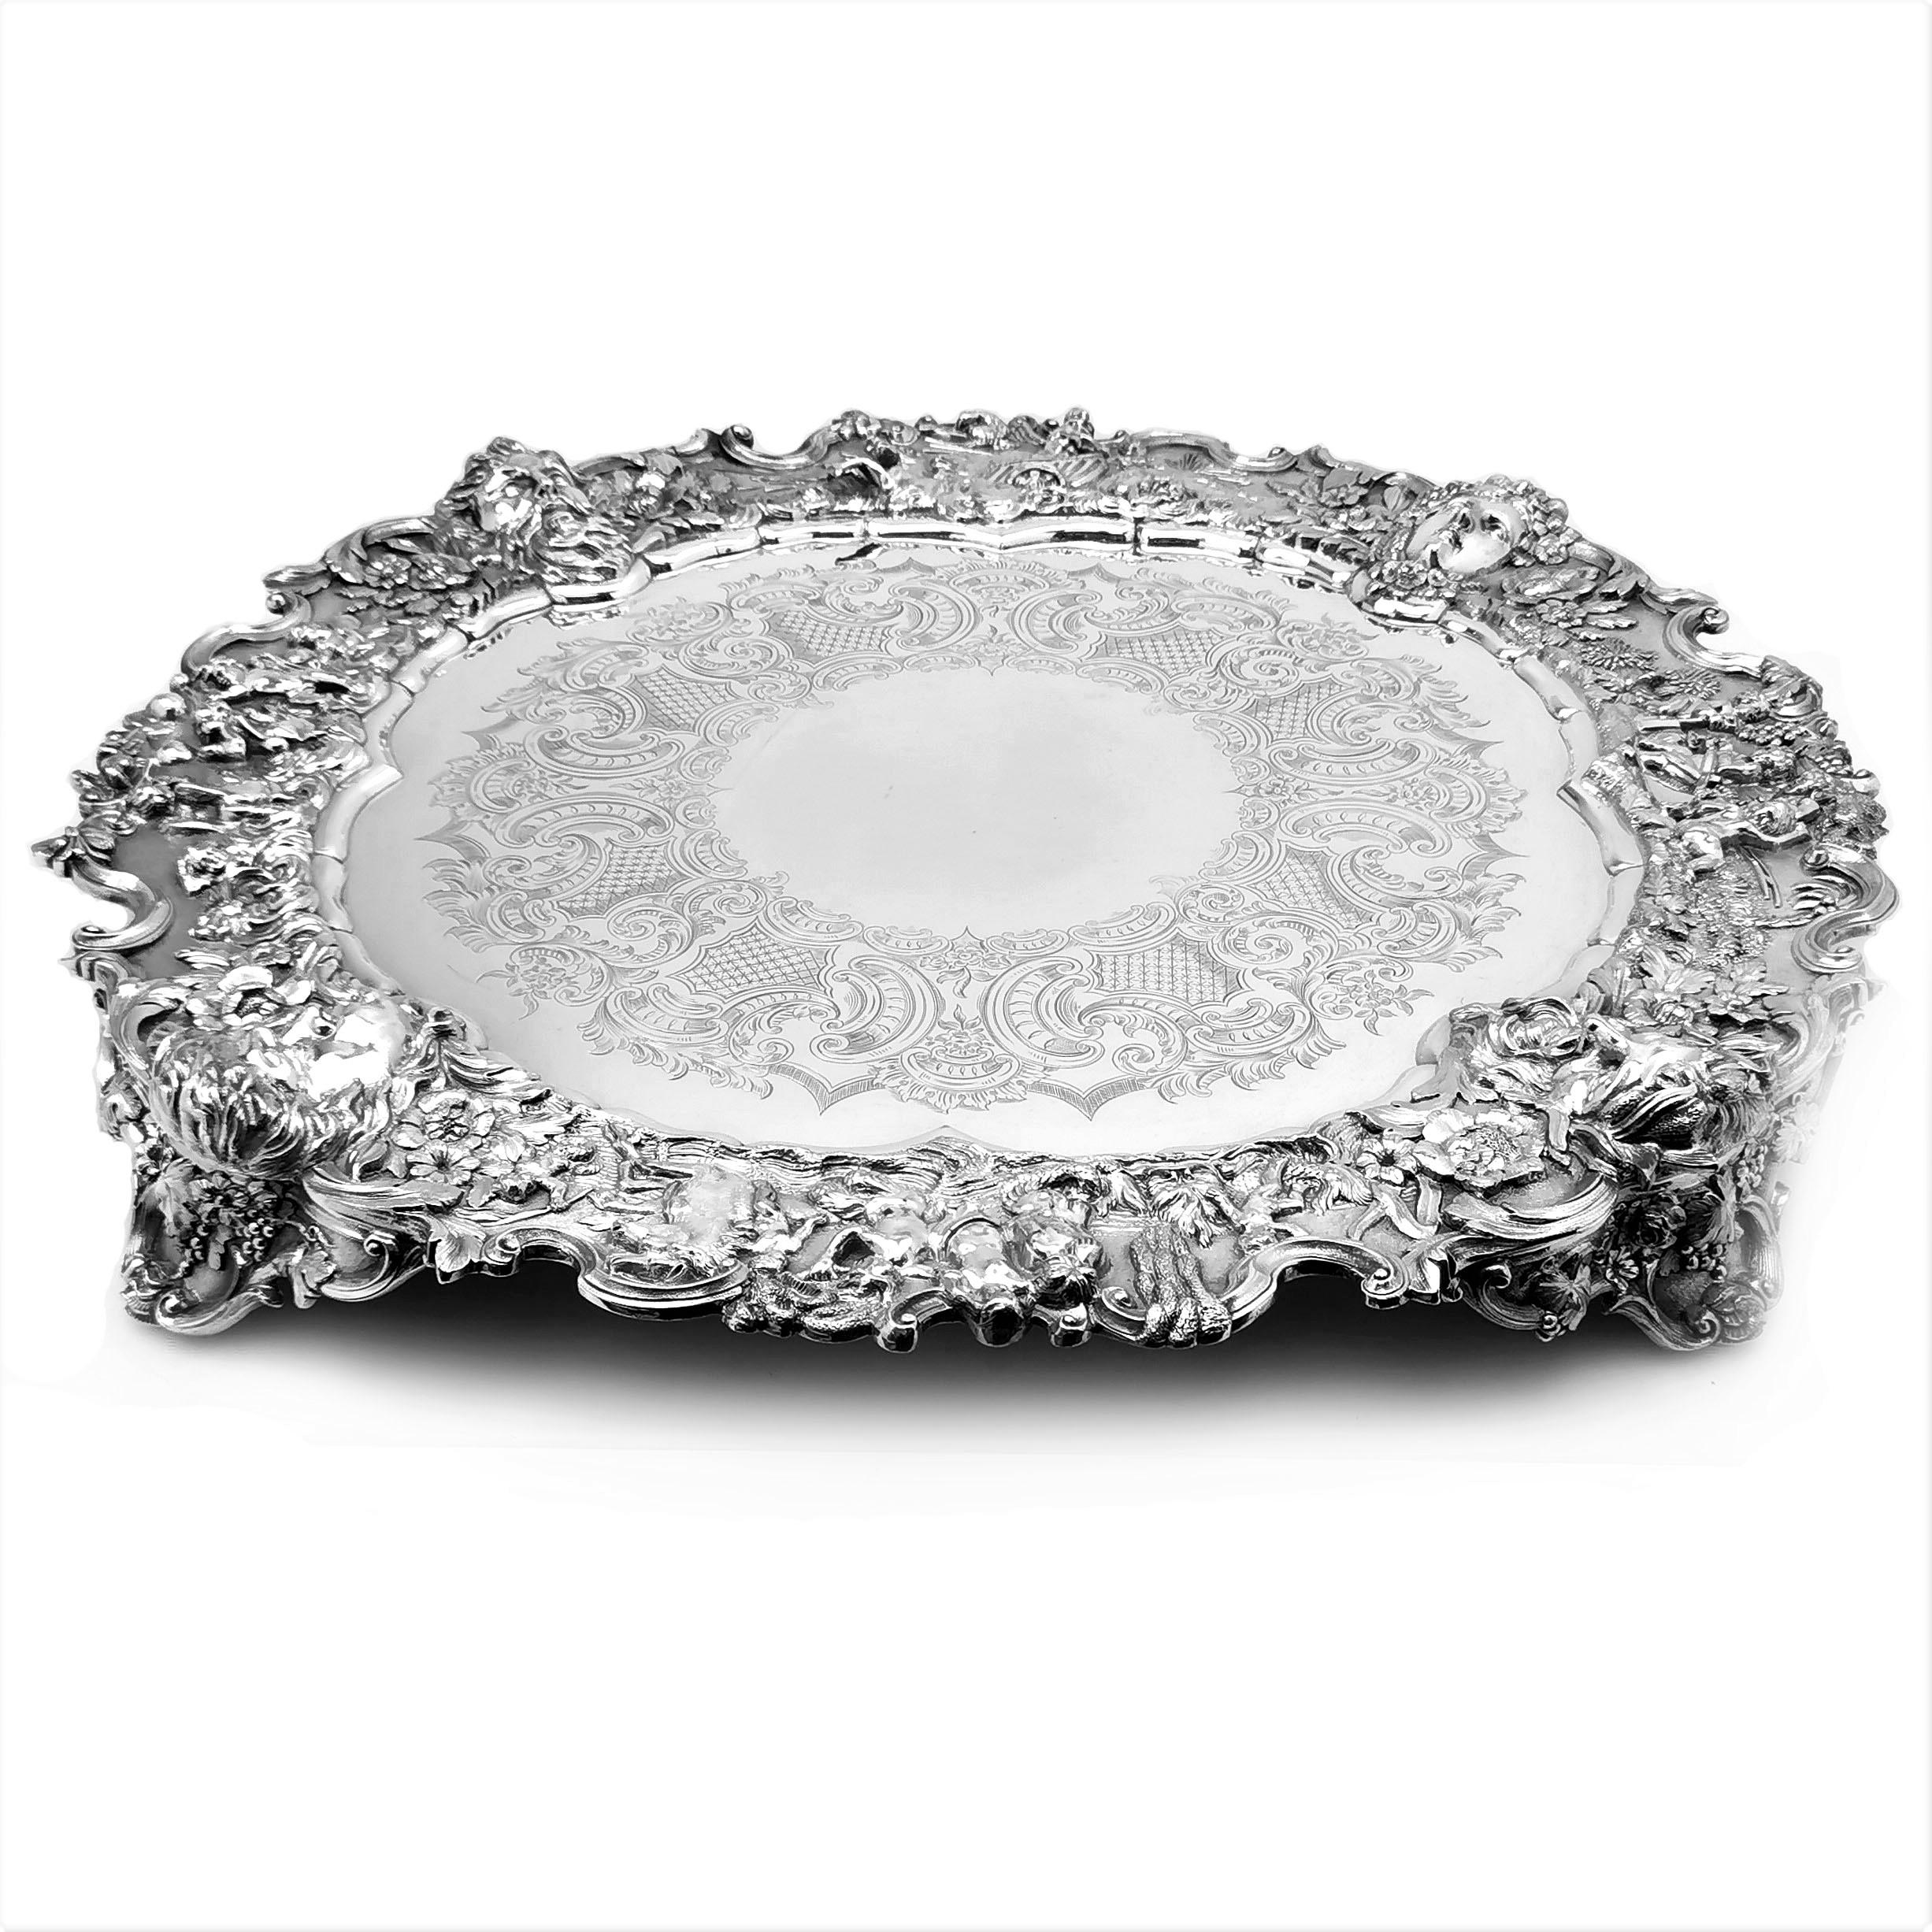 An impressive antique Victorian Silver Plated Salver. This ornate Salver is of extremely large size and very heavy weight. The Salver has a beautiful decorative border with four faces above the four feet of the salver. The borders between the faces